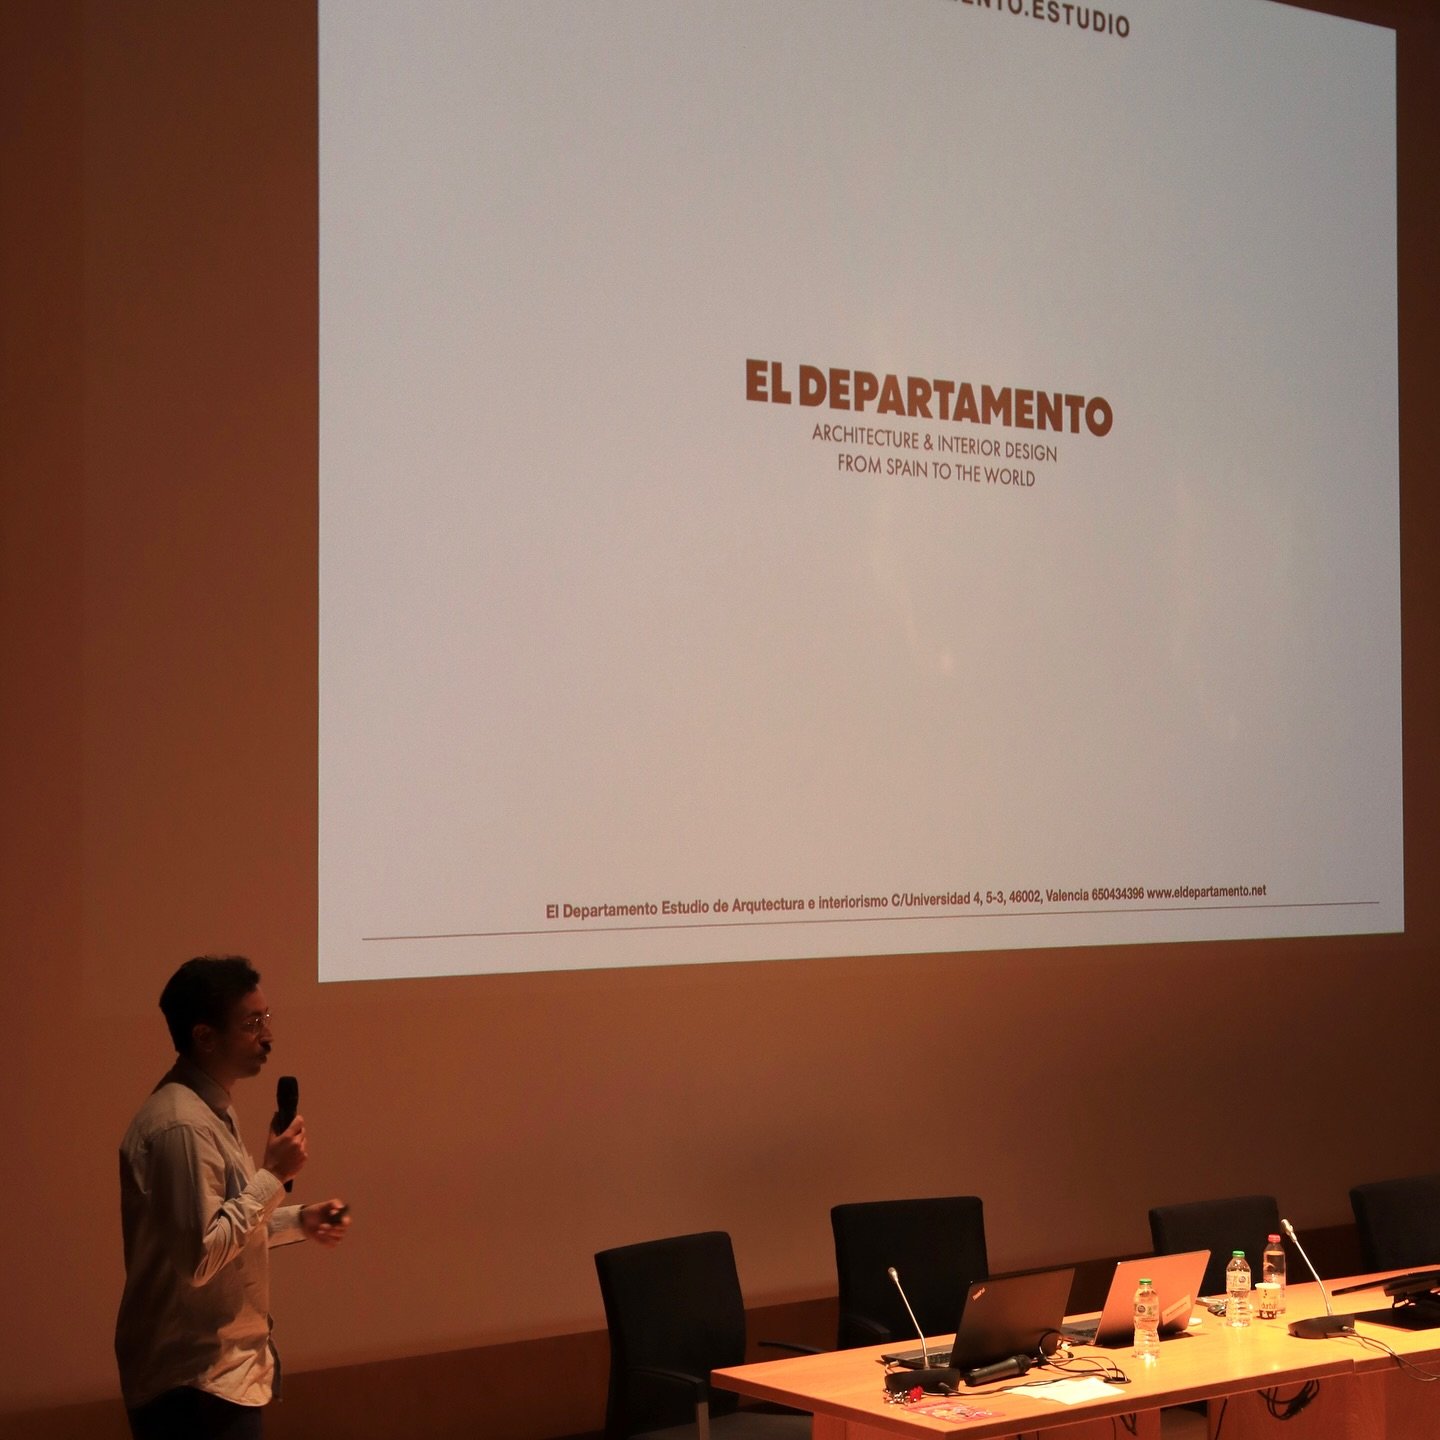 Last week, we had the opportunity to present at @etsaupv during the @etsa.topia festival. We shared the origins of @eldepartamento.estudio and discussed our strategies for sustained success going forward. Thanks for the invitation, and to such great 